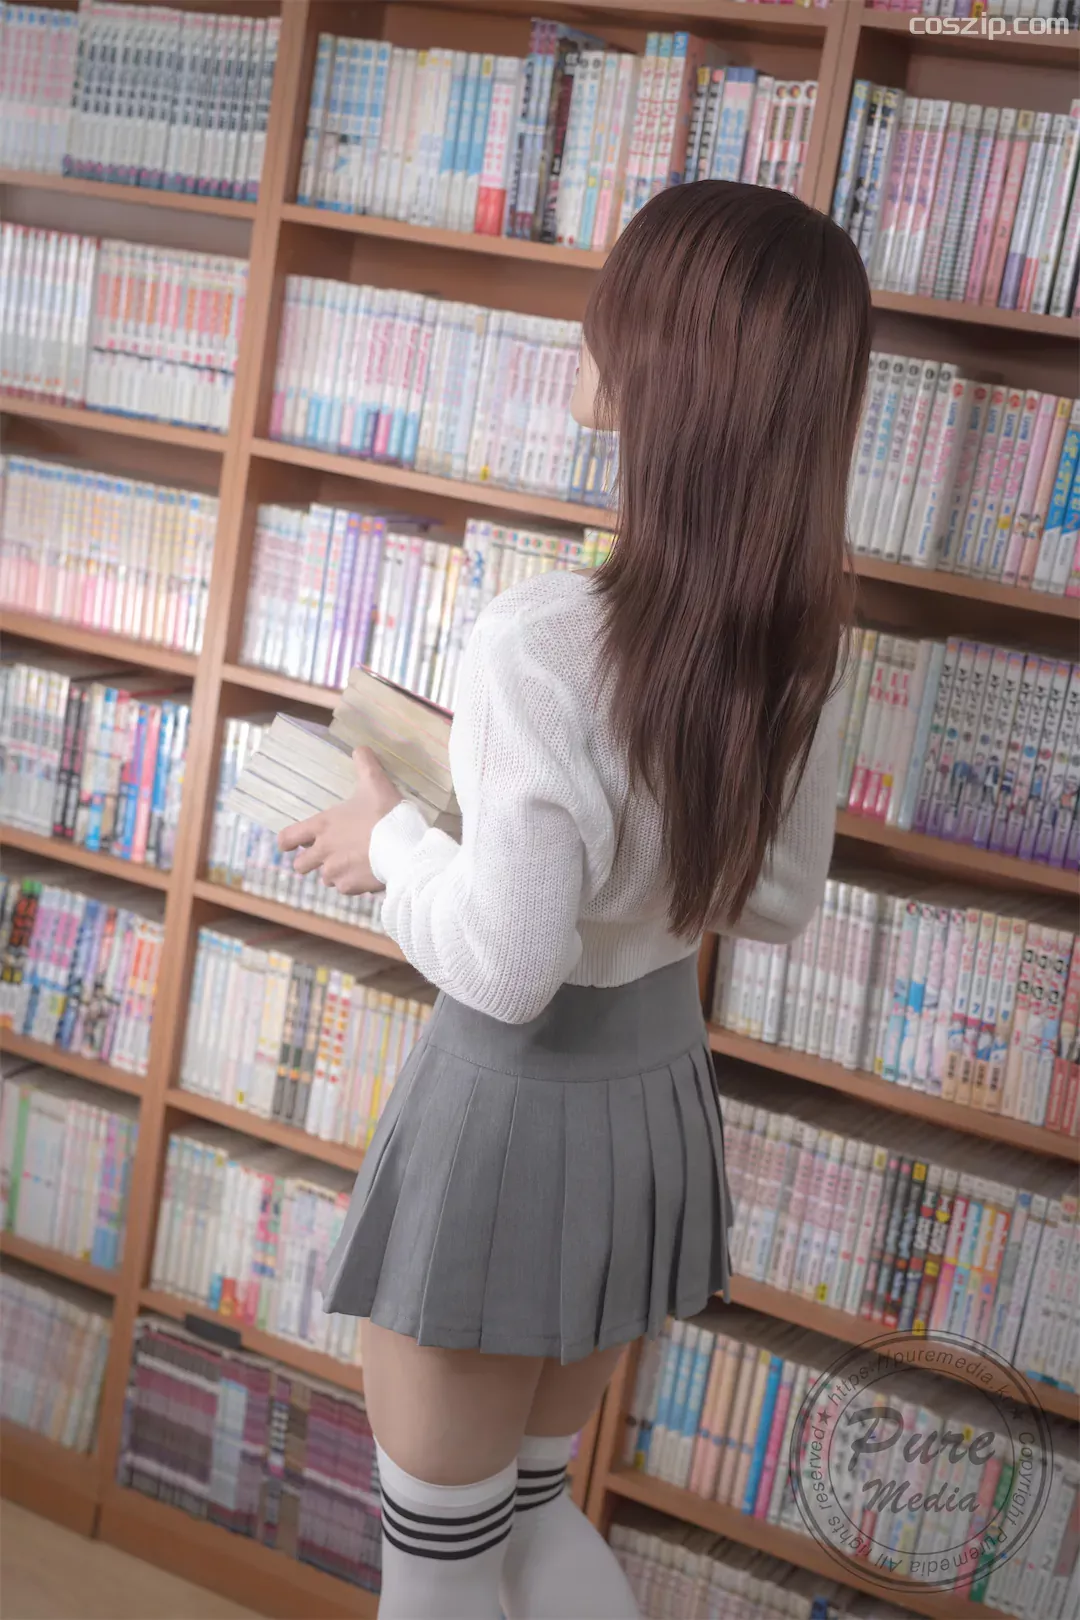 Pure-Media-Vol.273-Yeha-Dreaming-With-Library-Girl-coszip.com-014